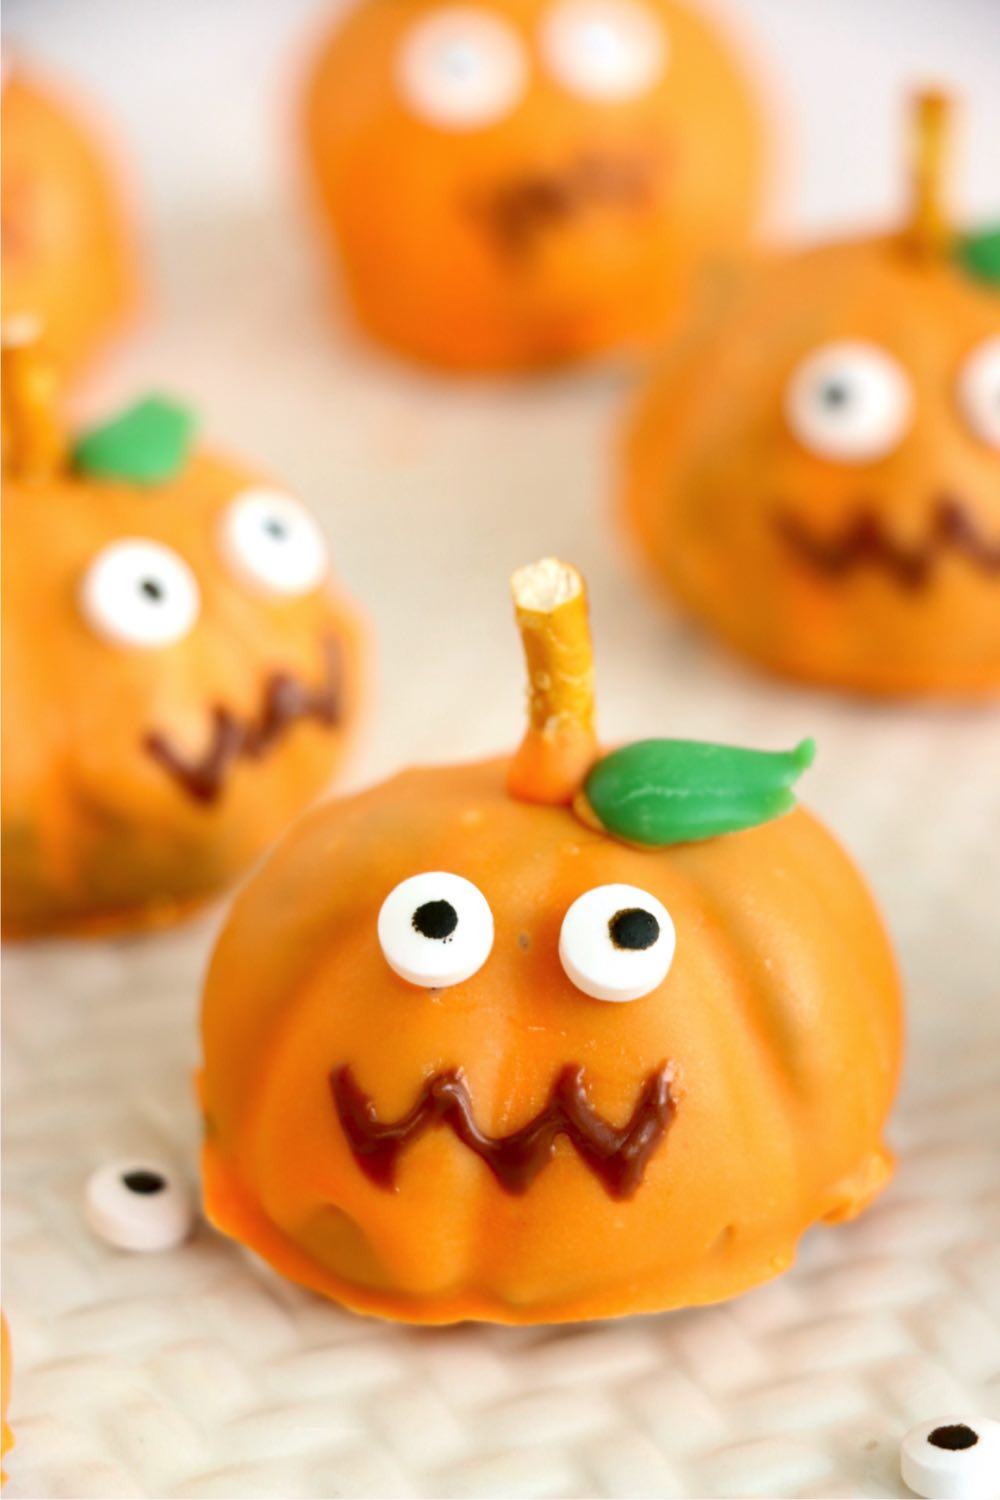 little pumpkin treats made out of Oreo cookies and candy melts